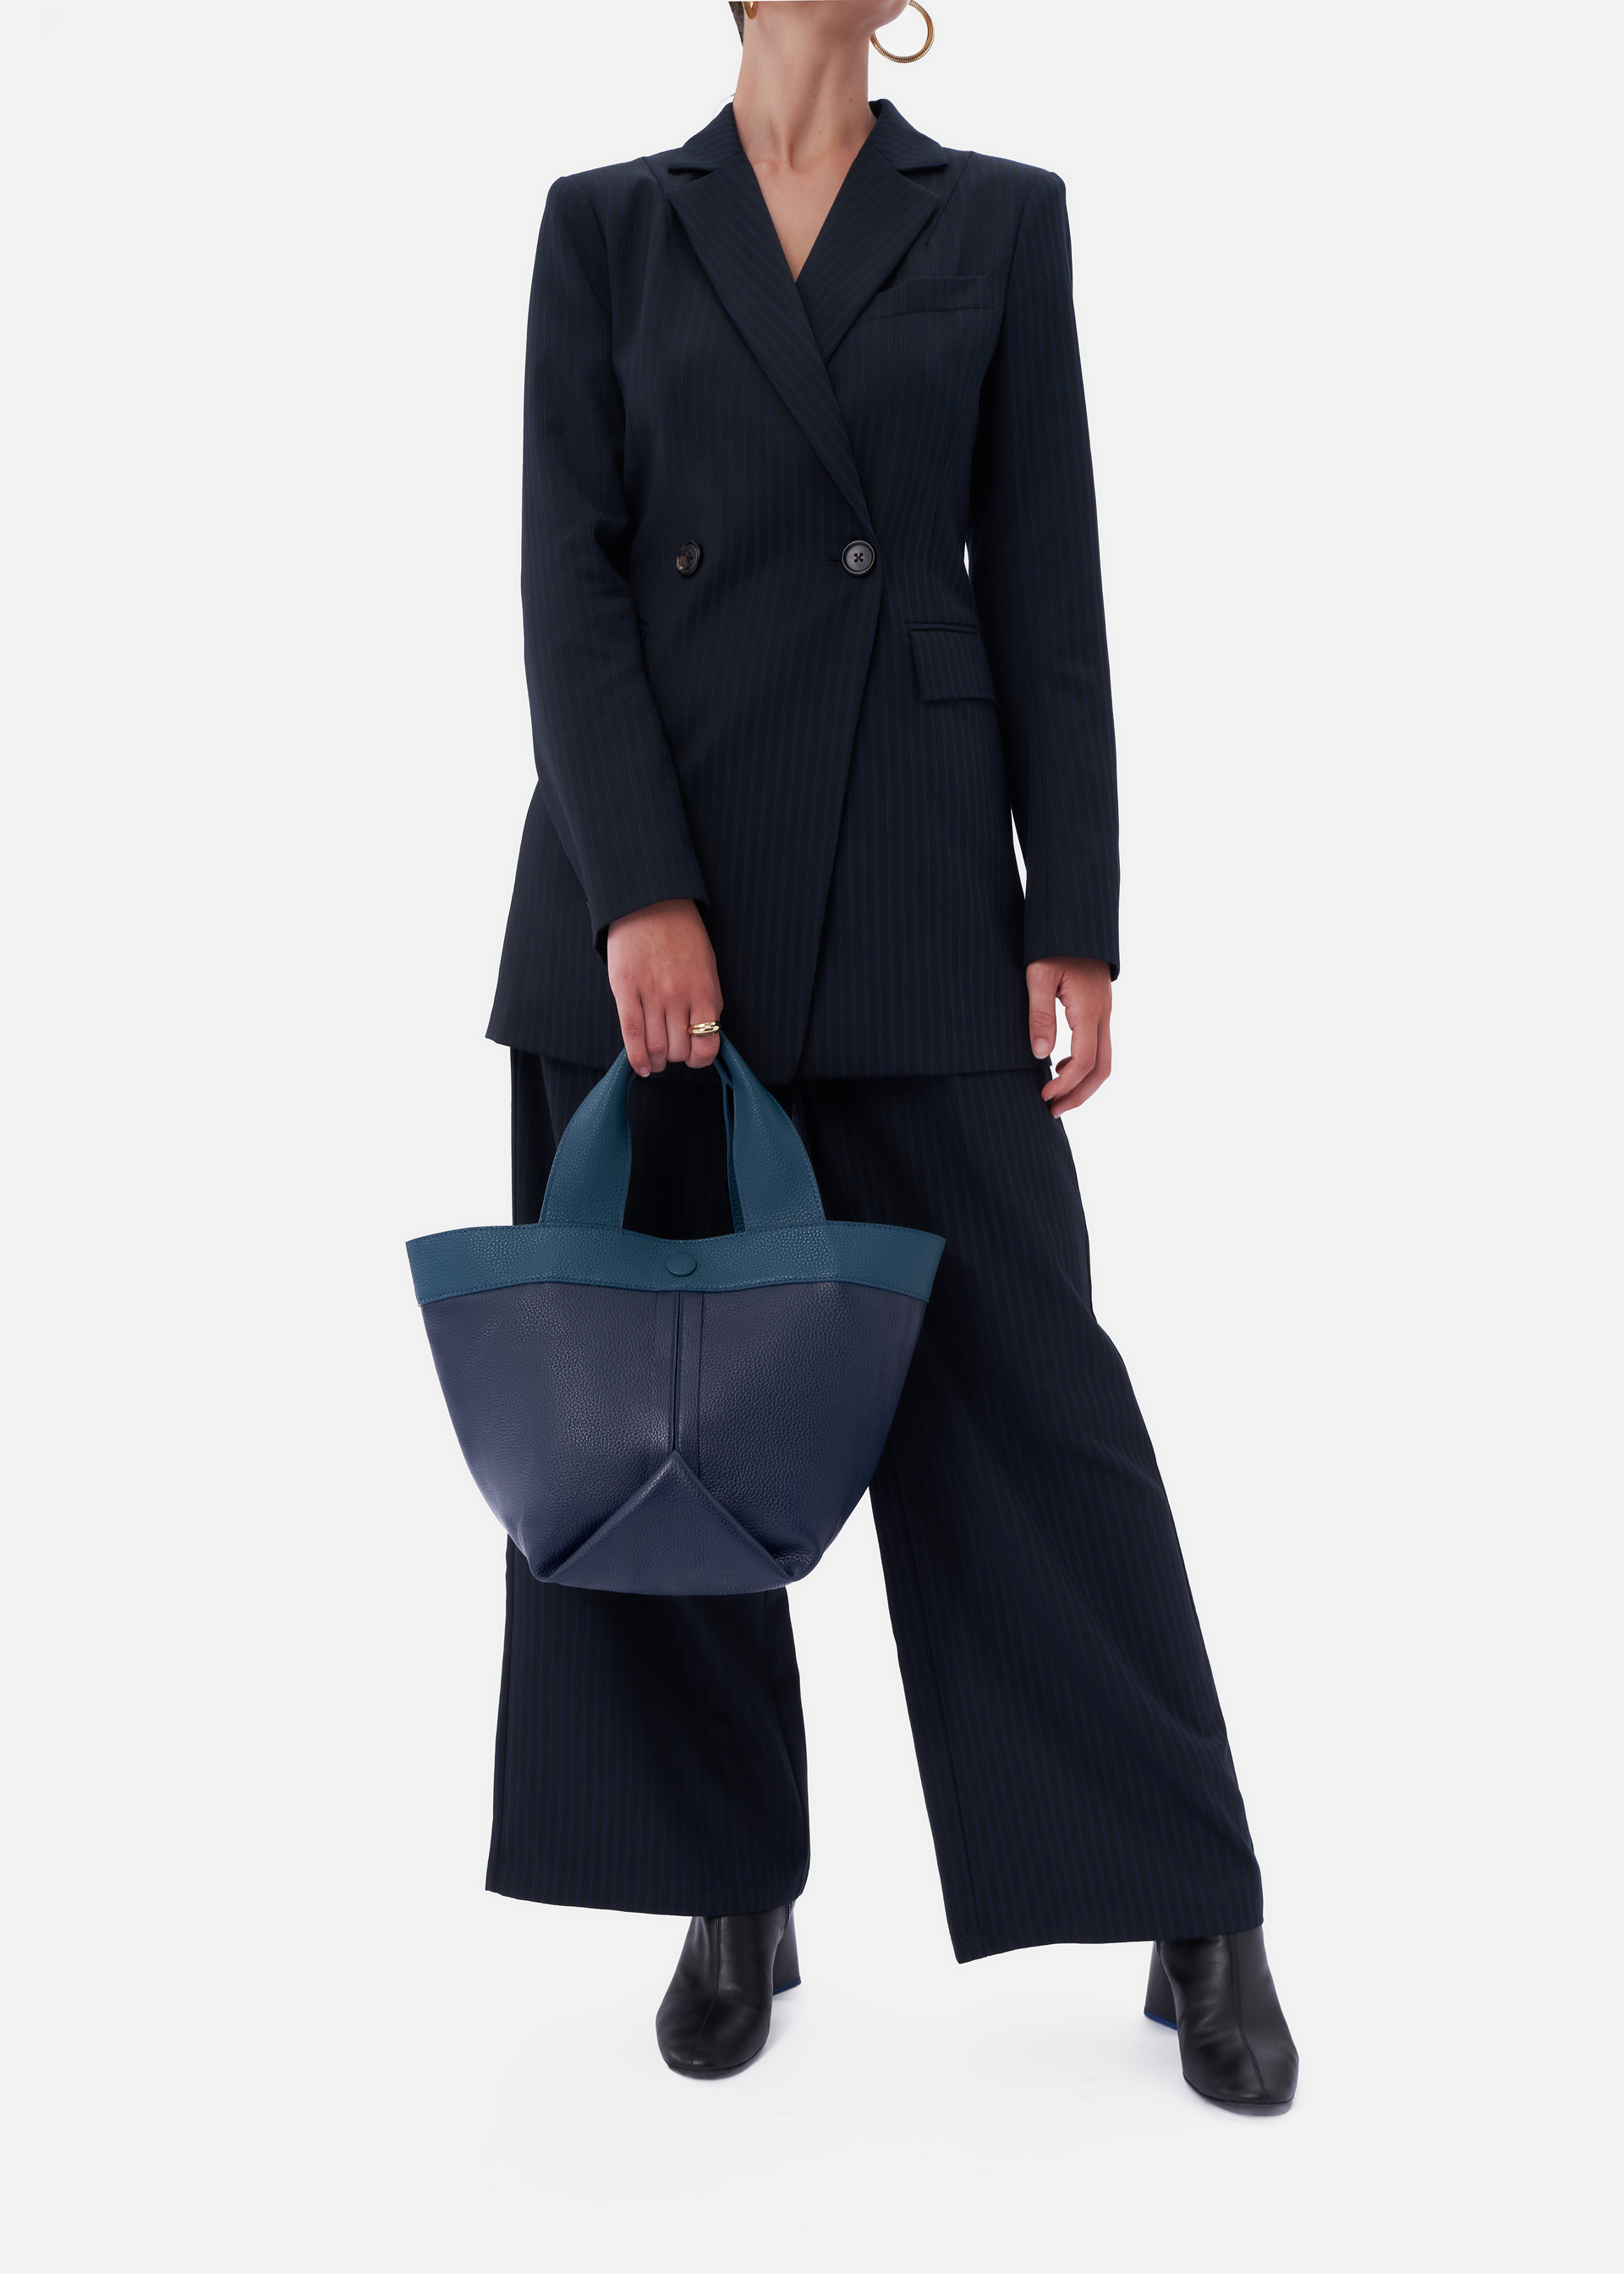 Gusset medium pebble leather tote in emerald forest / blazer blue